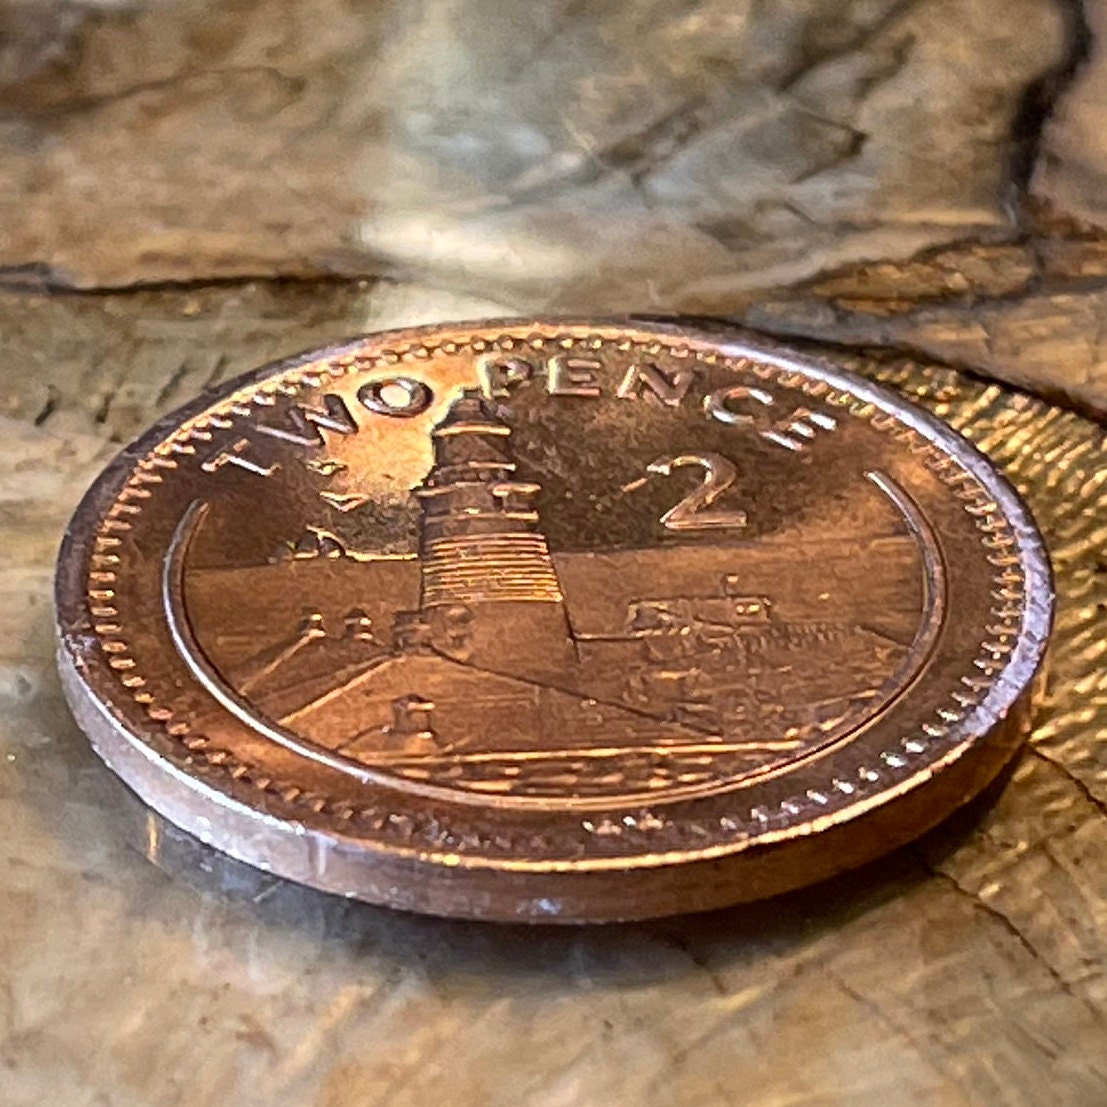 Europa Point Lighthouse Gibraltar 2 Pence Authentic Coin Money for Jewelry and Craft Making